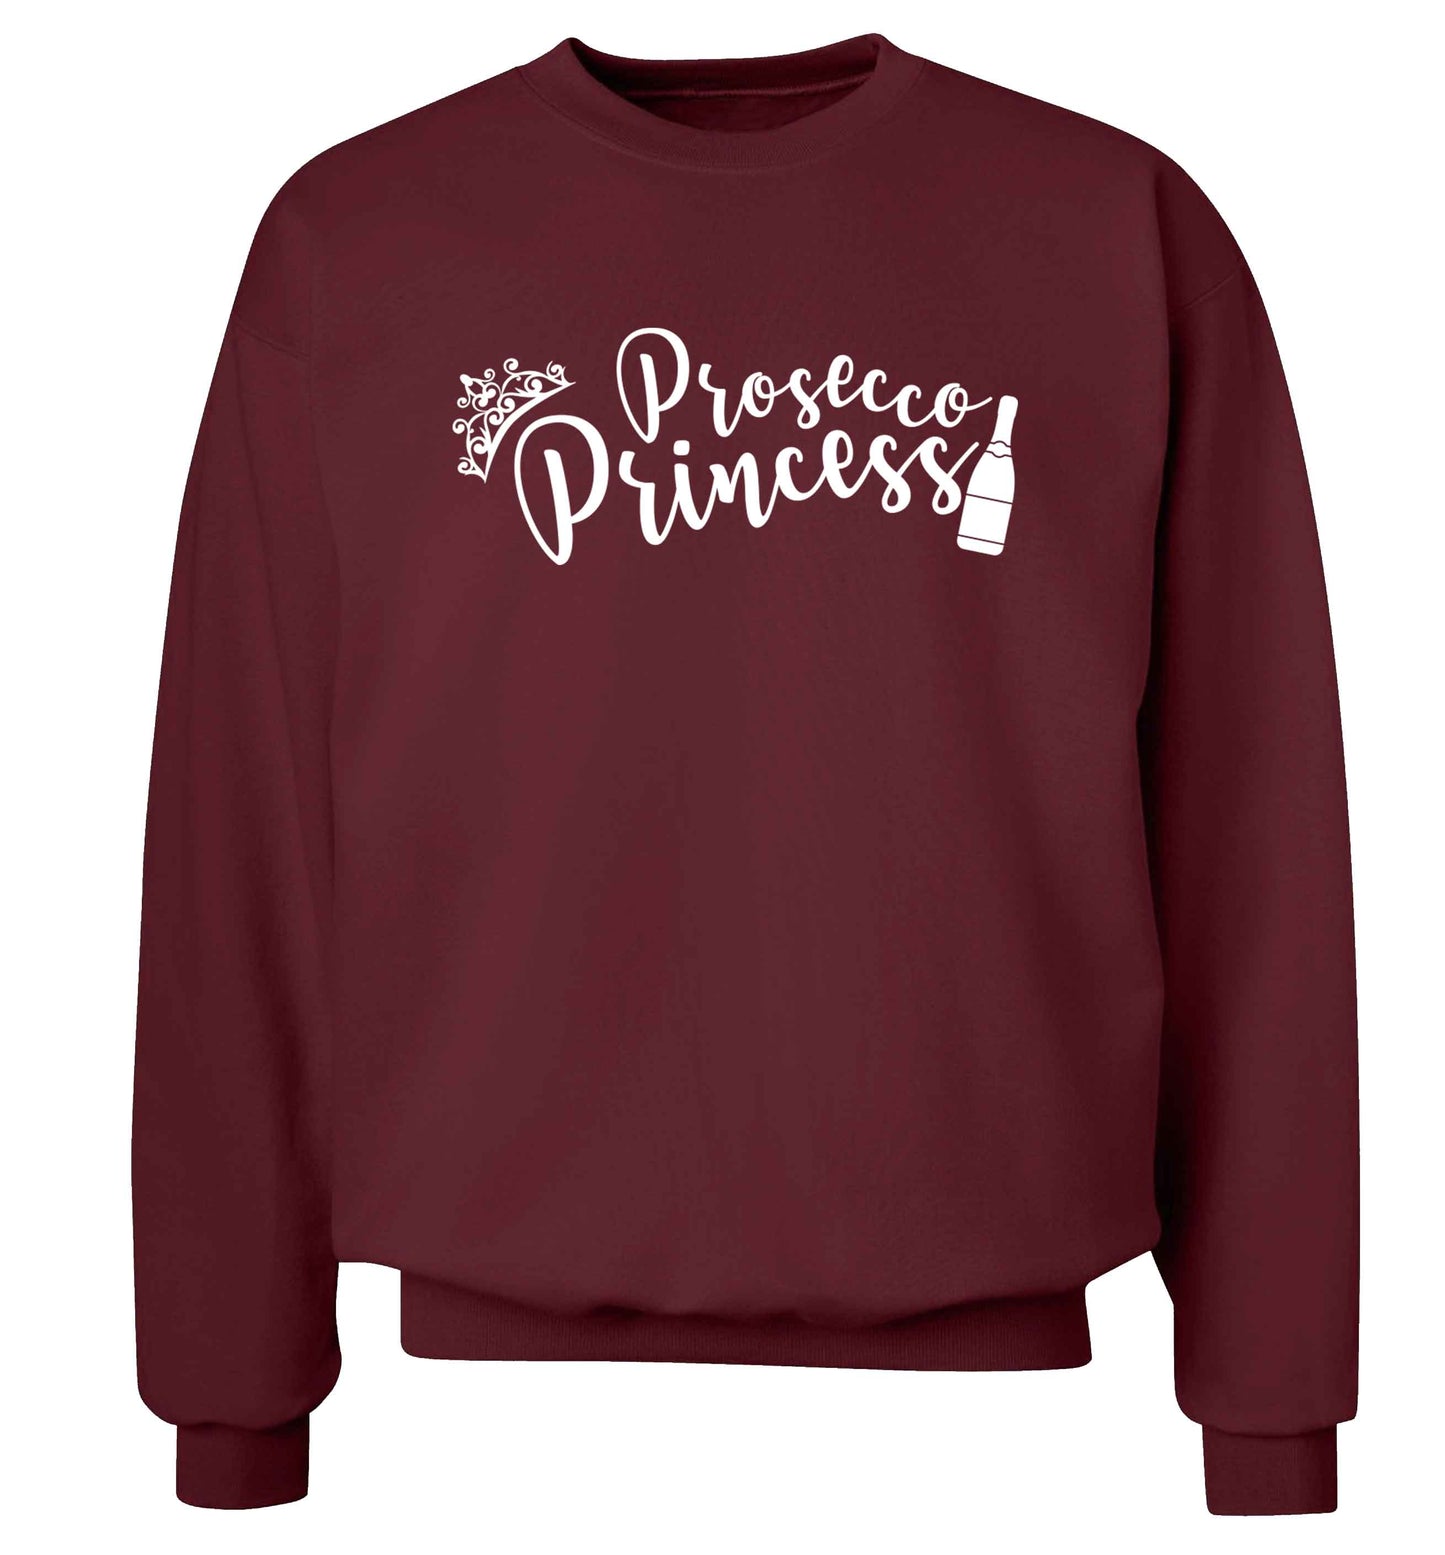 Prosecco princess Adult's unisex maroon Sweater 2XL